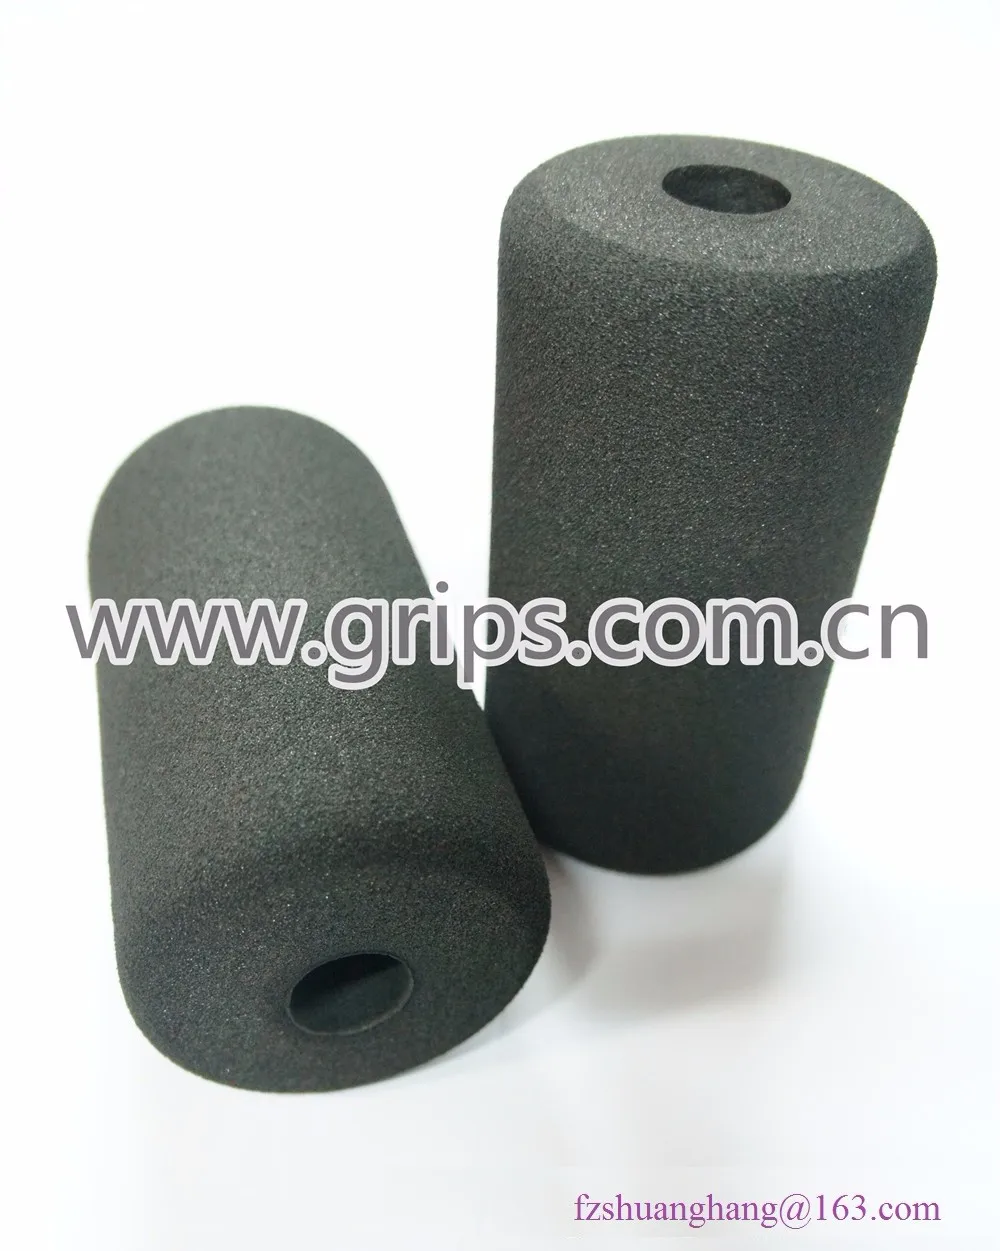 

Gym Facility Foam Roller, Length 5.3inches, OD 3 inches, ID 0.95inches Black Grinding